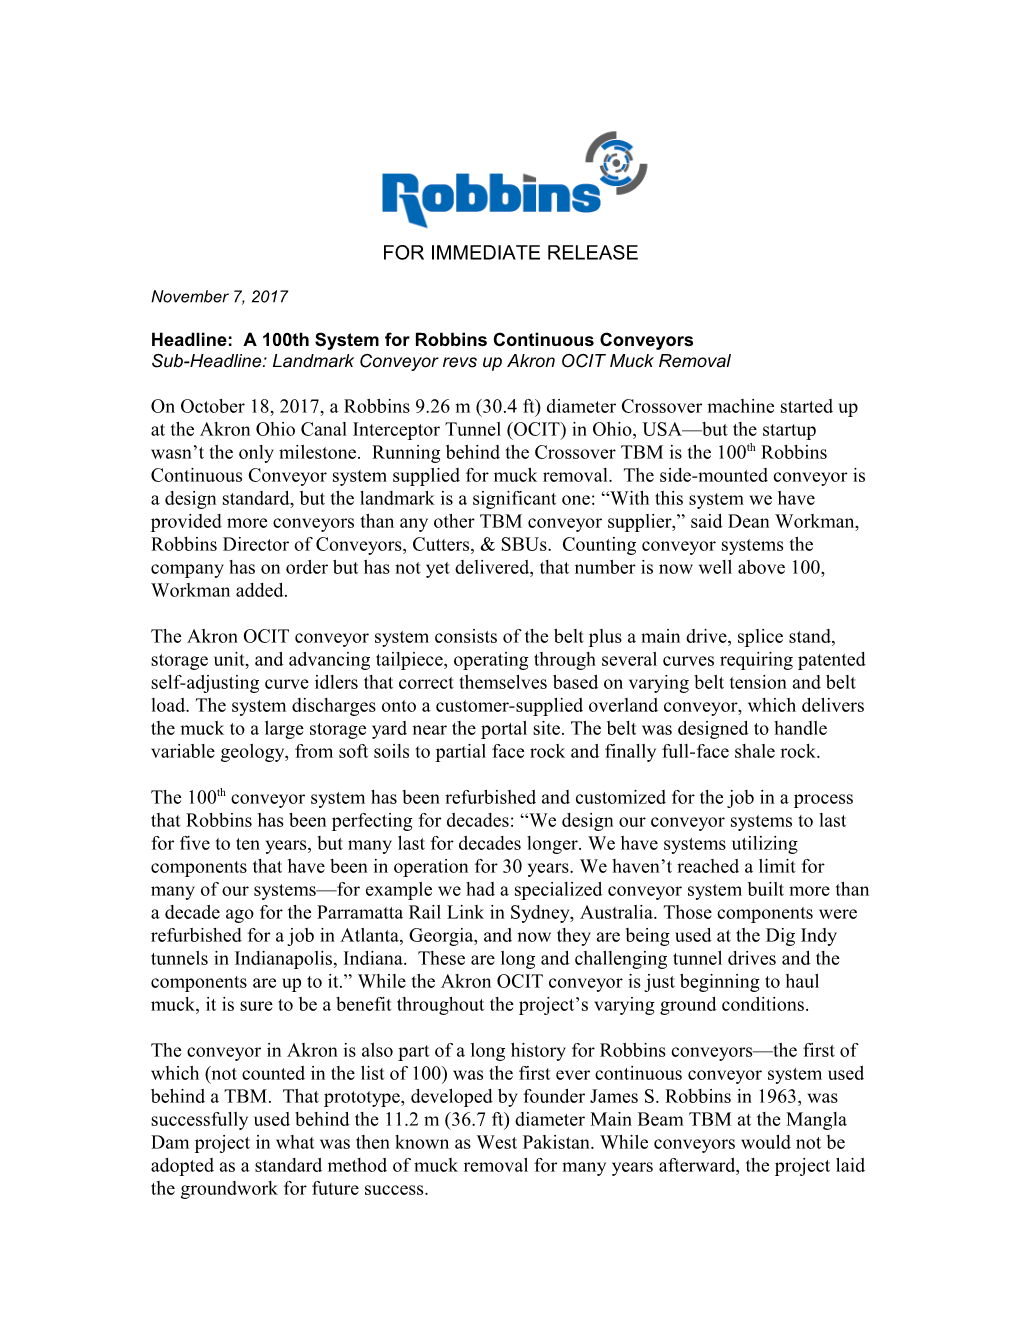 Headline: a 100Th System for Robbins Continuous Conveyors